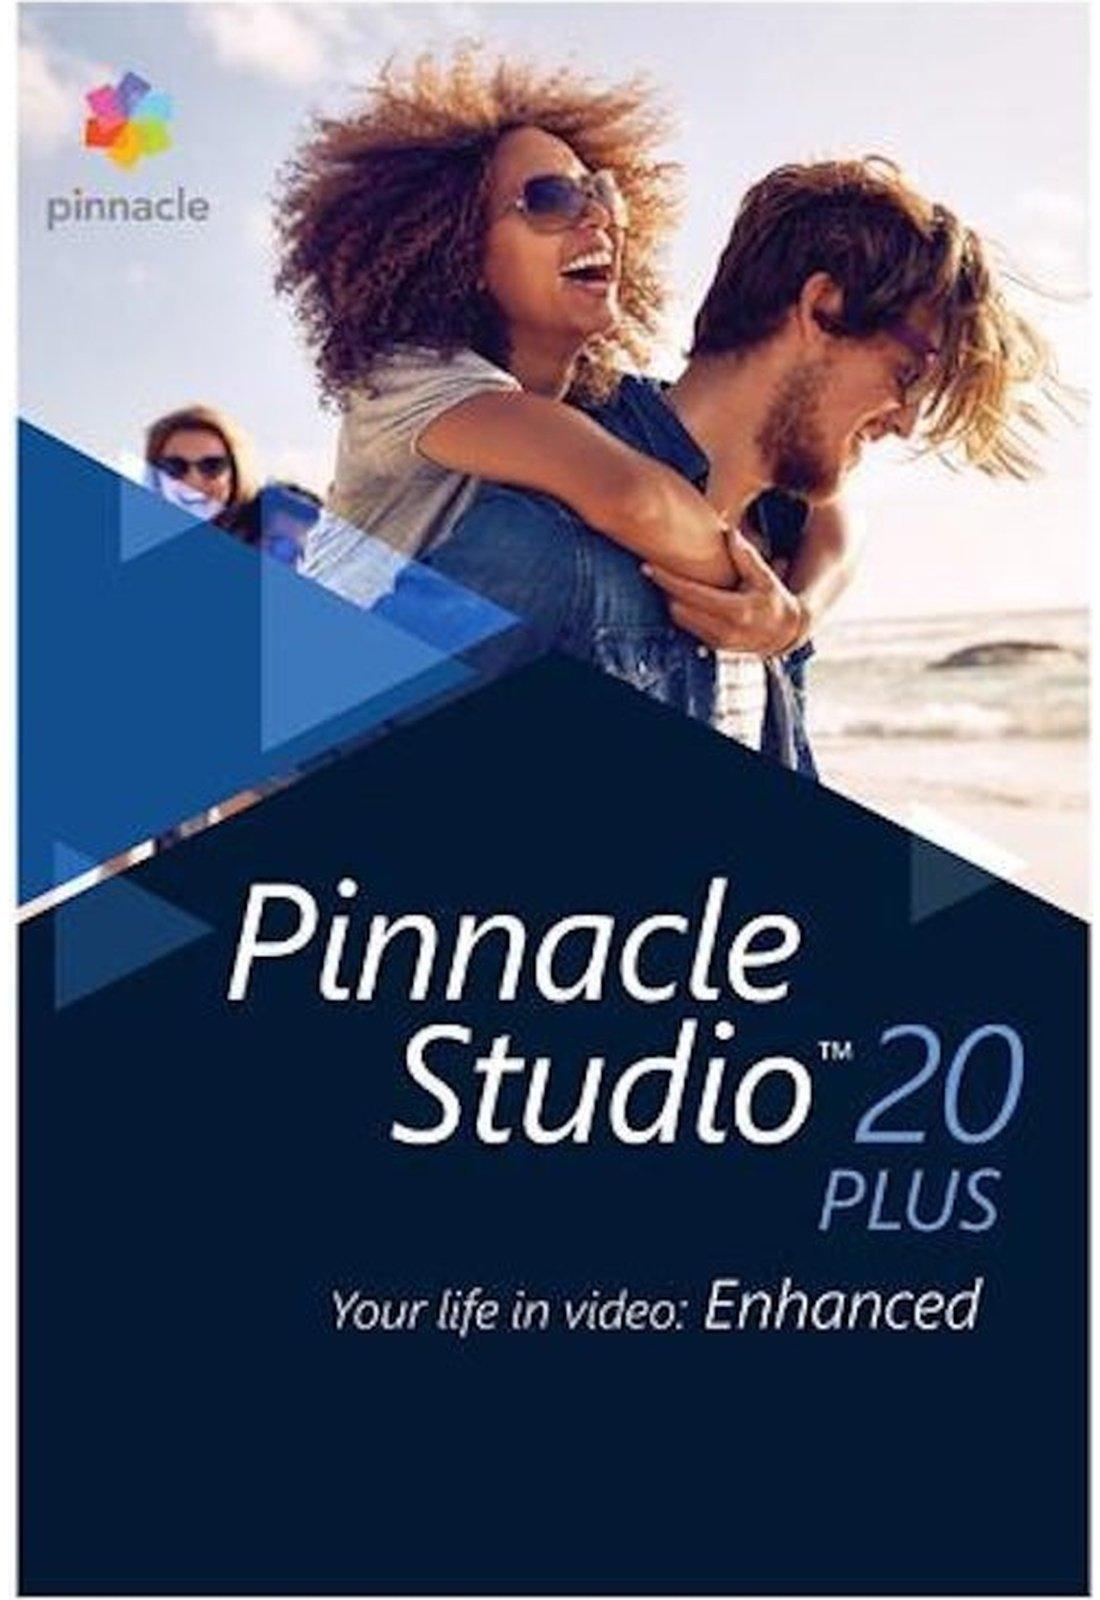 Pinnacle Studio 20 Plus - Instant Download for Windows (1 Computer) - SoftwareCW - Authorized Reseller